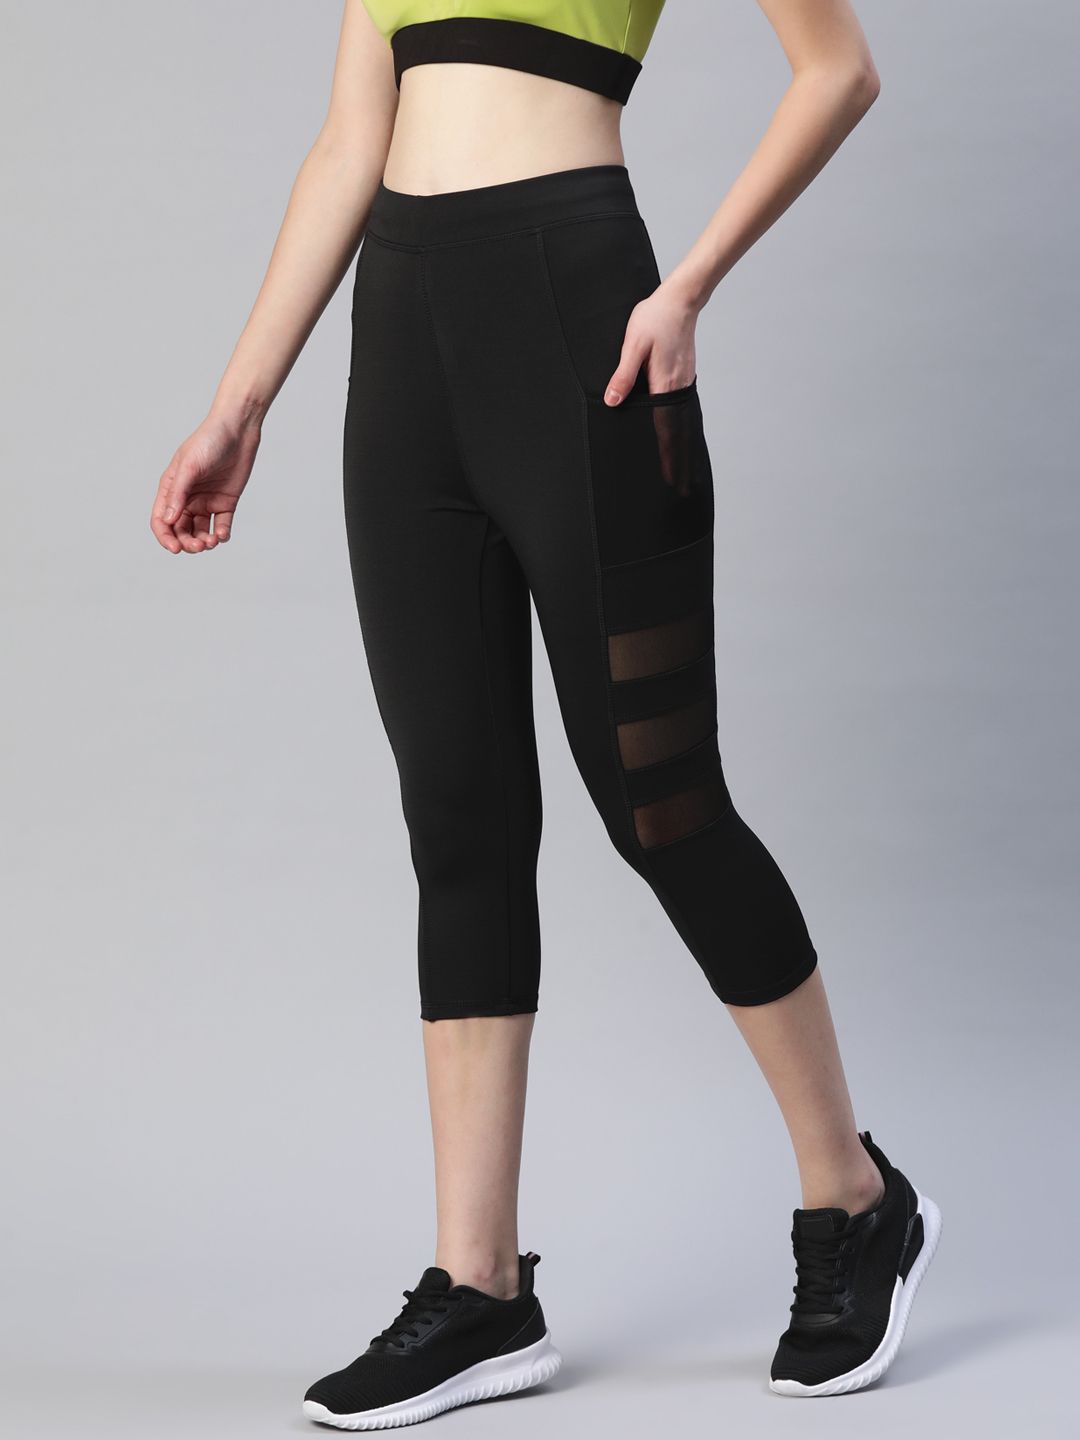 Blinkin Women Black Rapid Dry 3/4th Tights With Breathable Mesh & Side Pockets Price in India